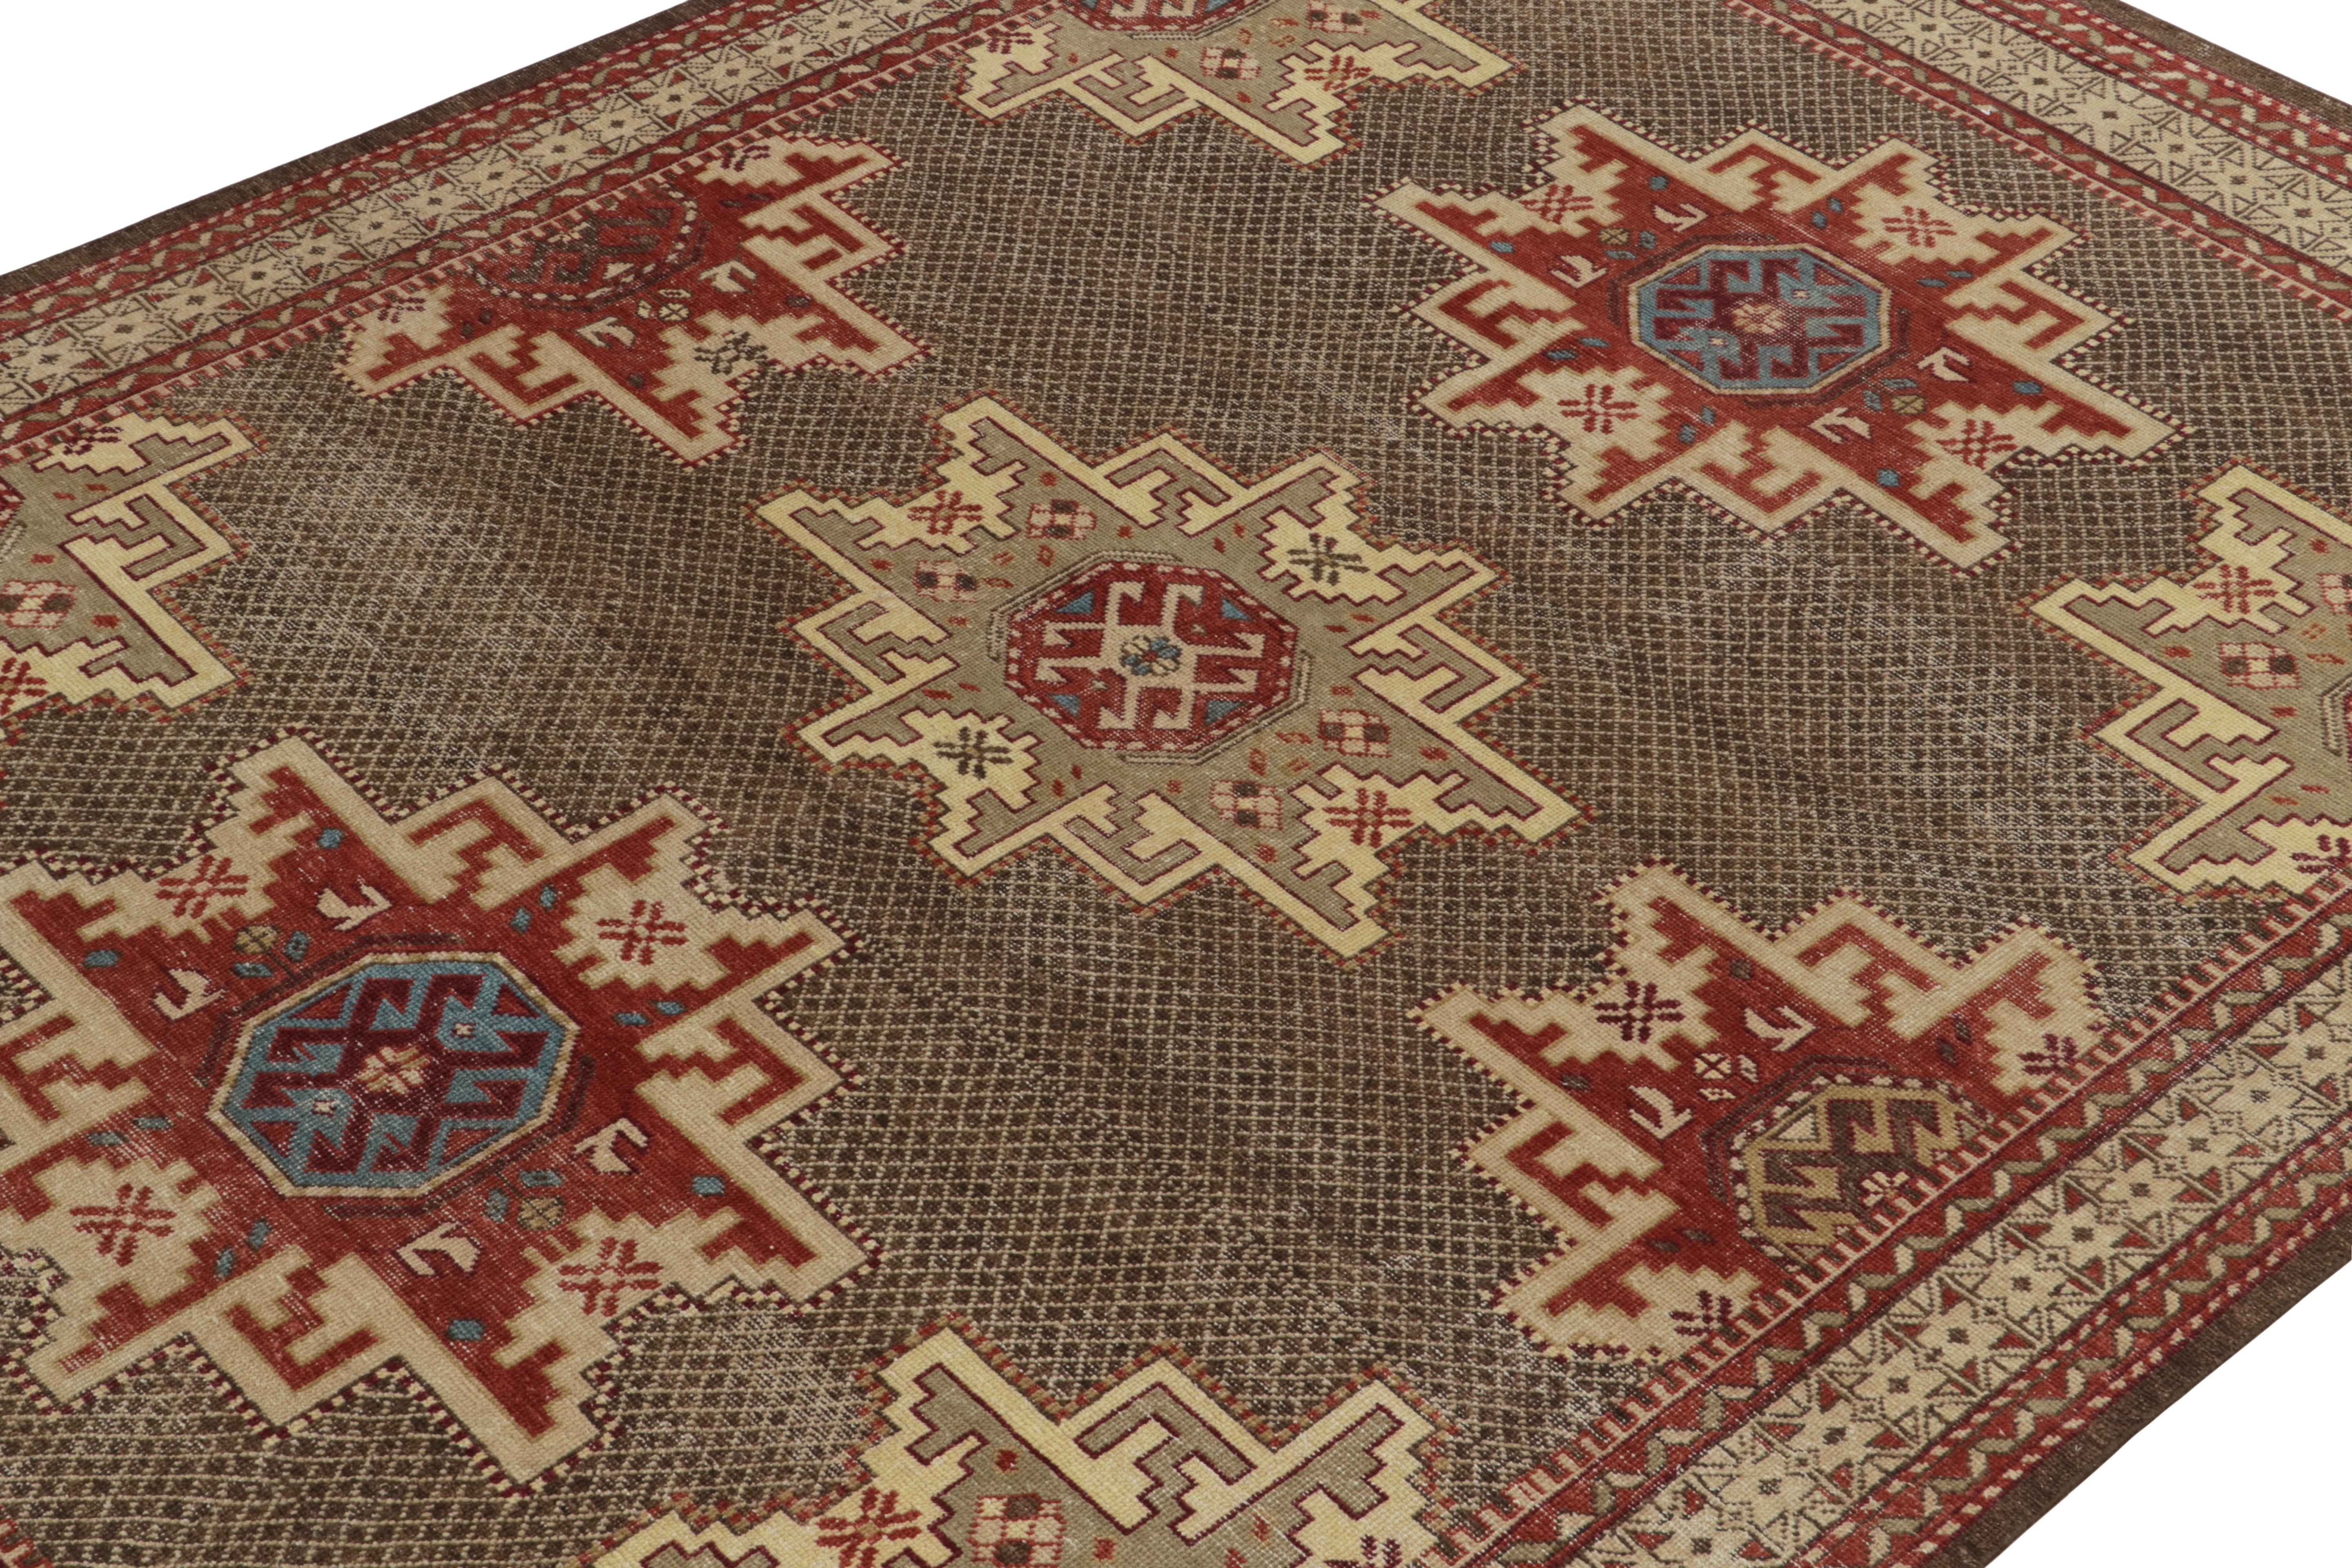 Indian Rug & Kilim's Distressed Kuba Style Rug in Red, Beige-Brown Medallions For Sale